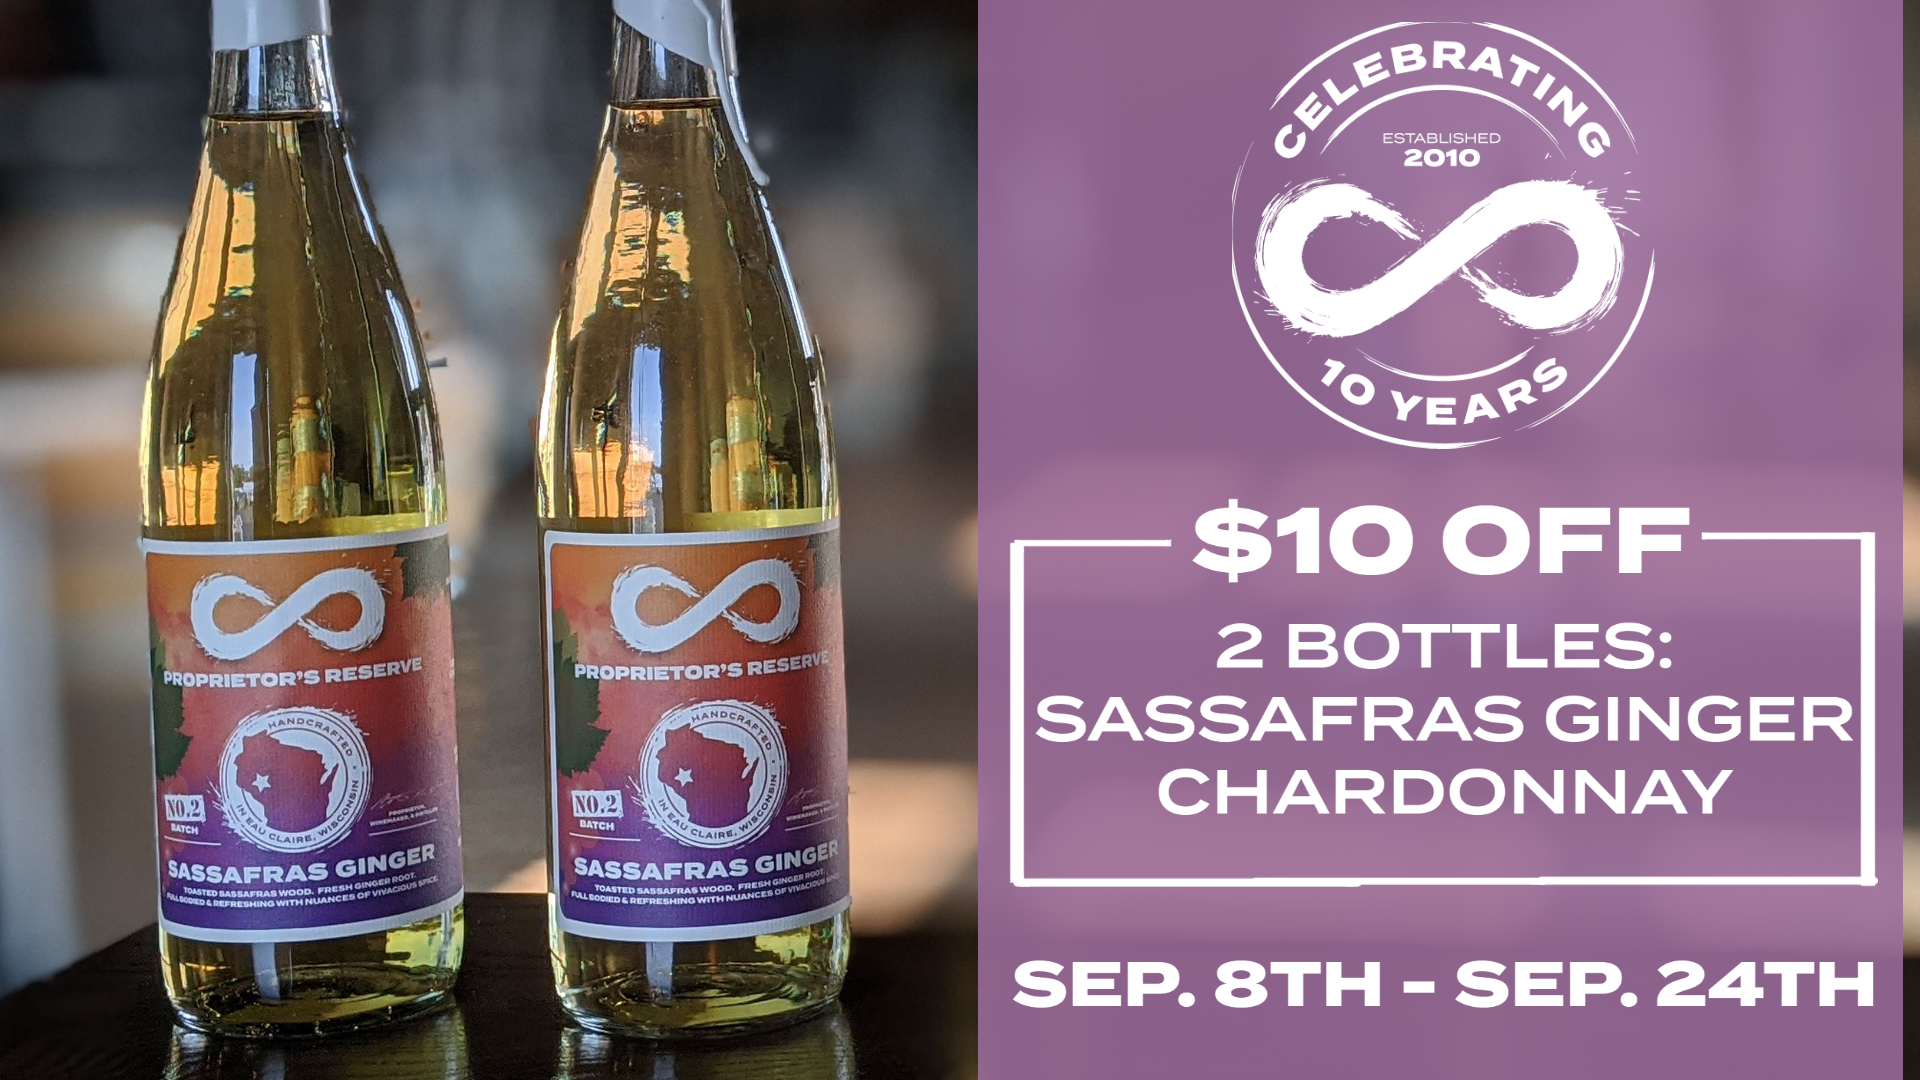 You are currently viewing $10 OFF TWO BOTTLES OF SASSAFRAS GINGER CHARDONNAY